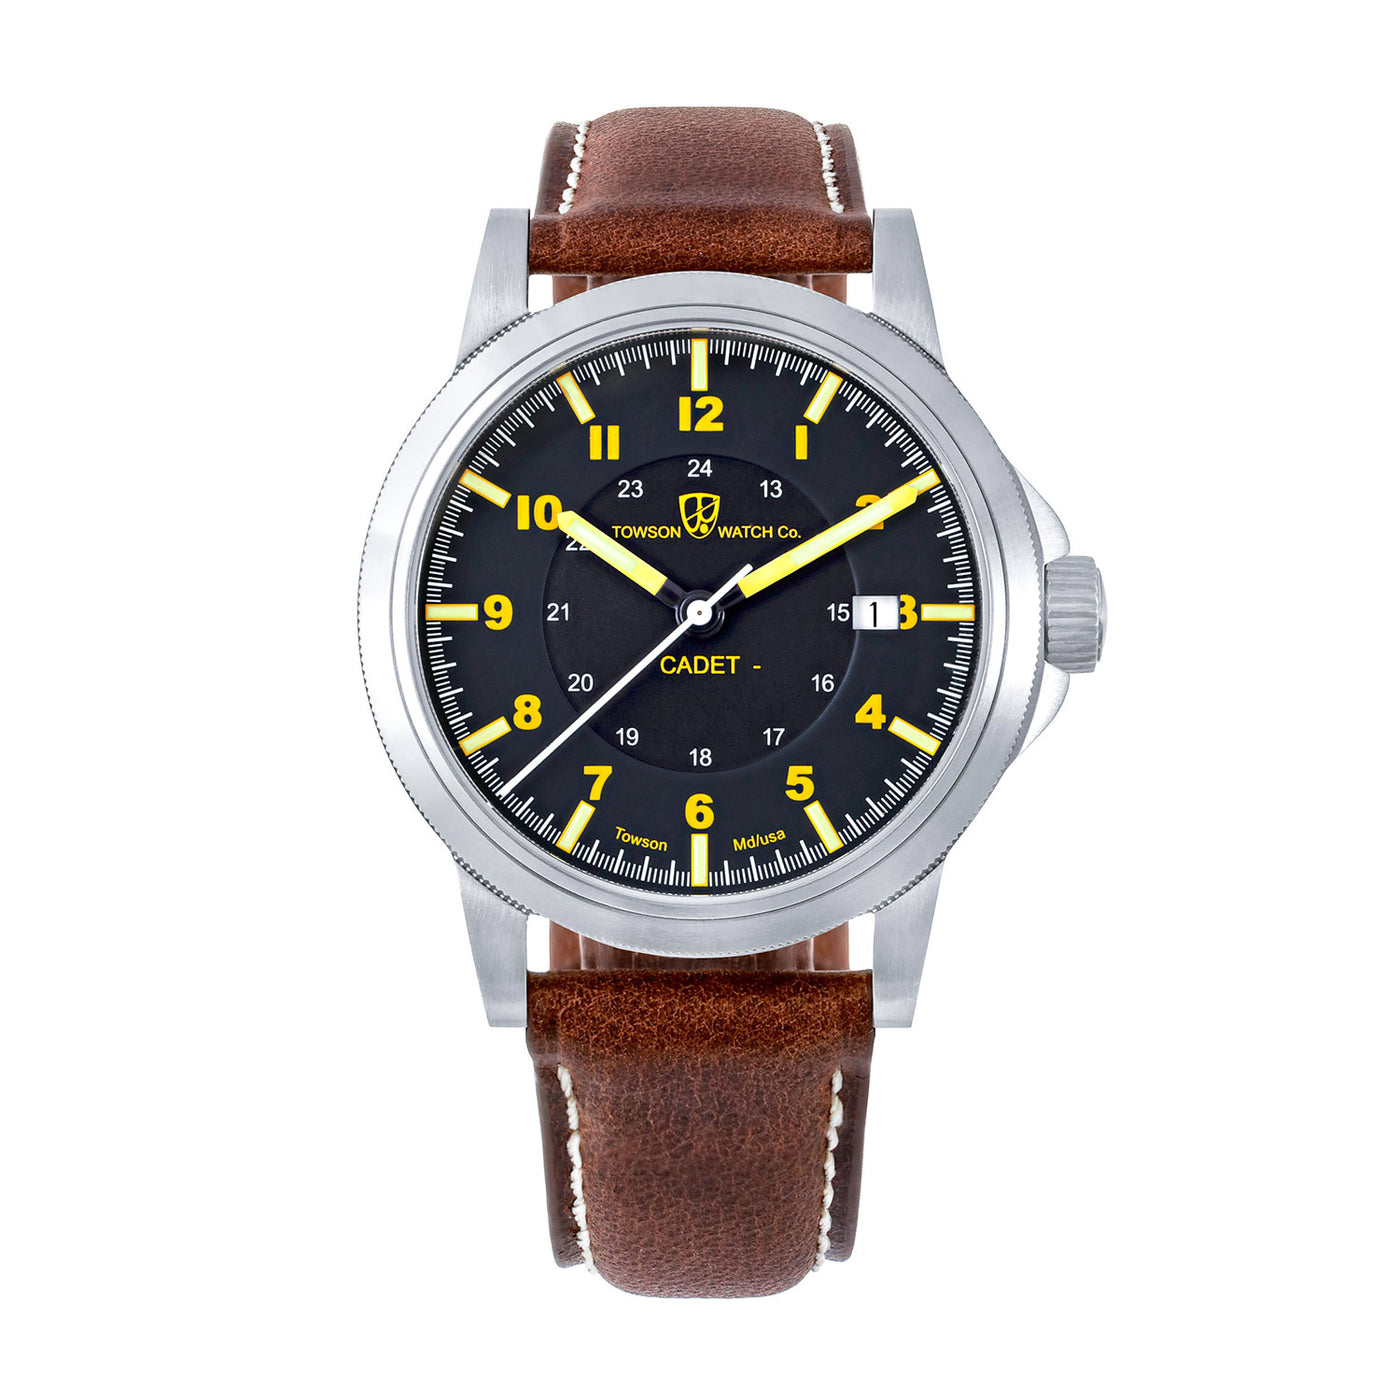 Towson Watch Company Recruit Automatic – CR250